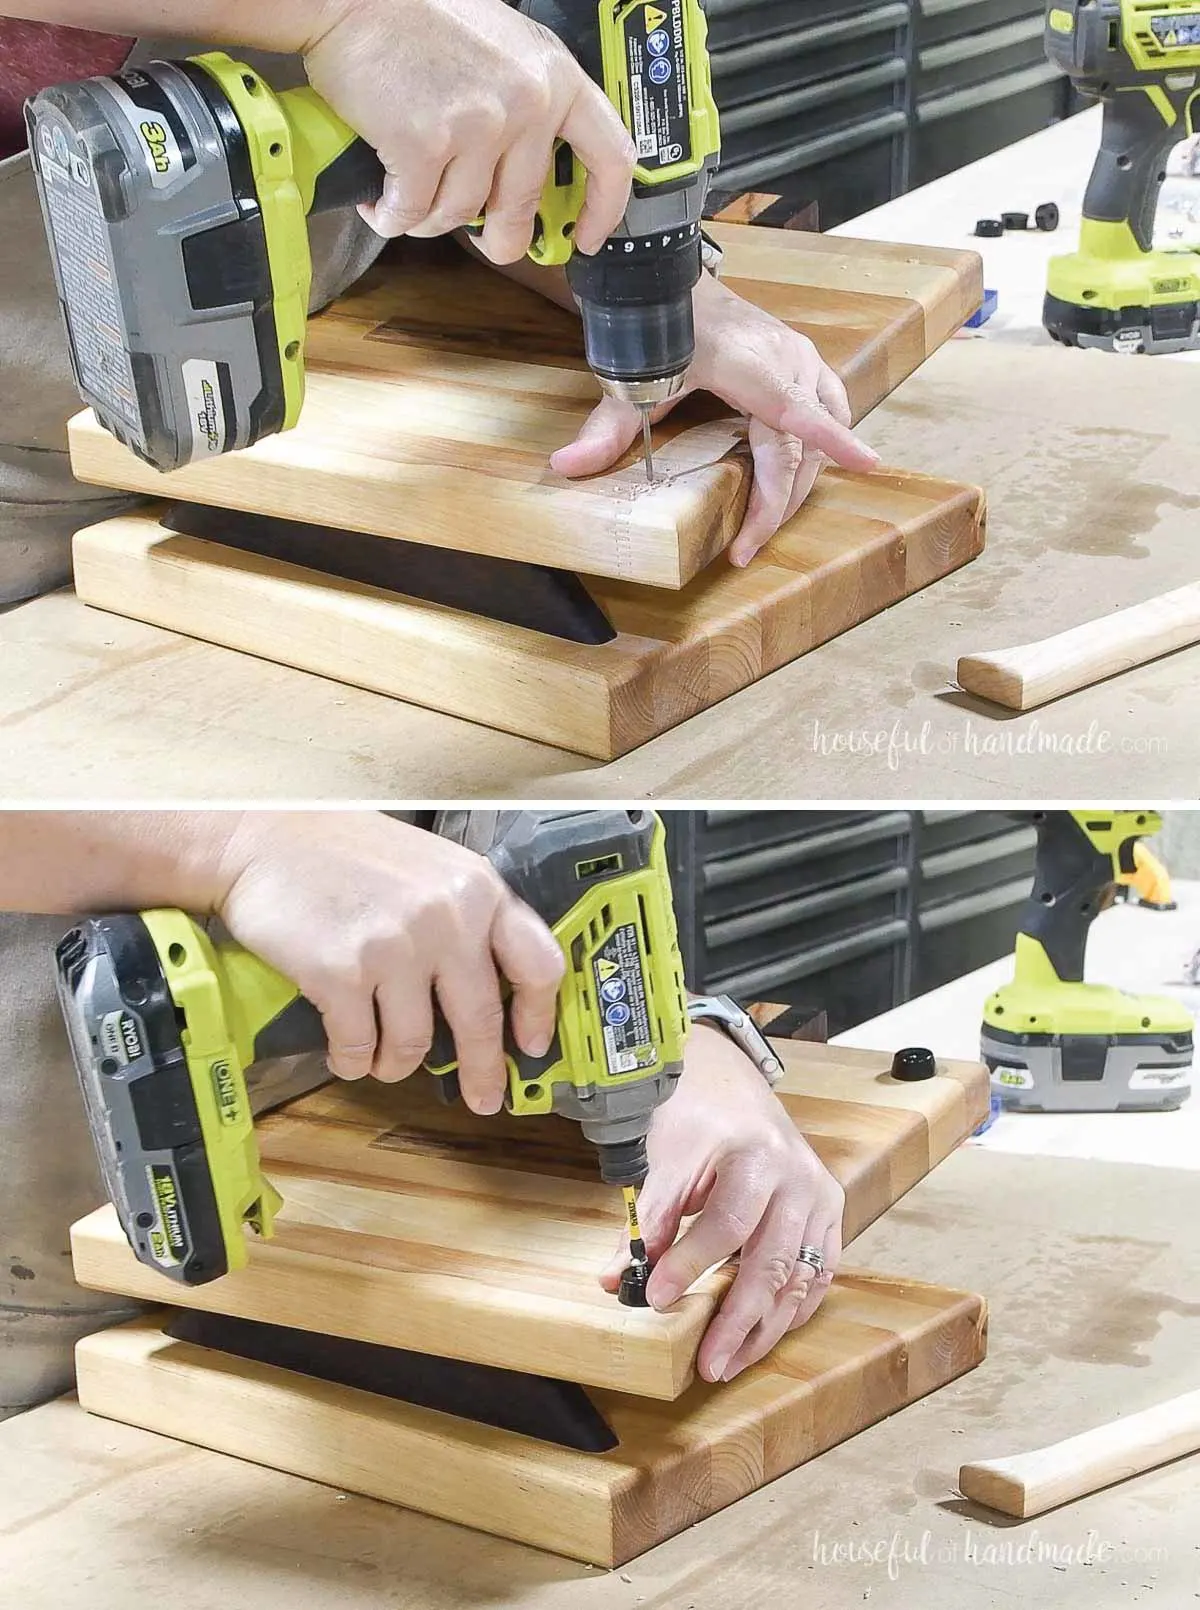 Attaching cutting board feet to the bottom of the wood tortilla press. 